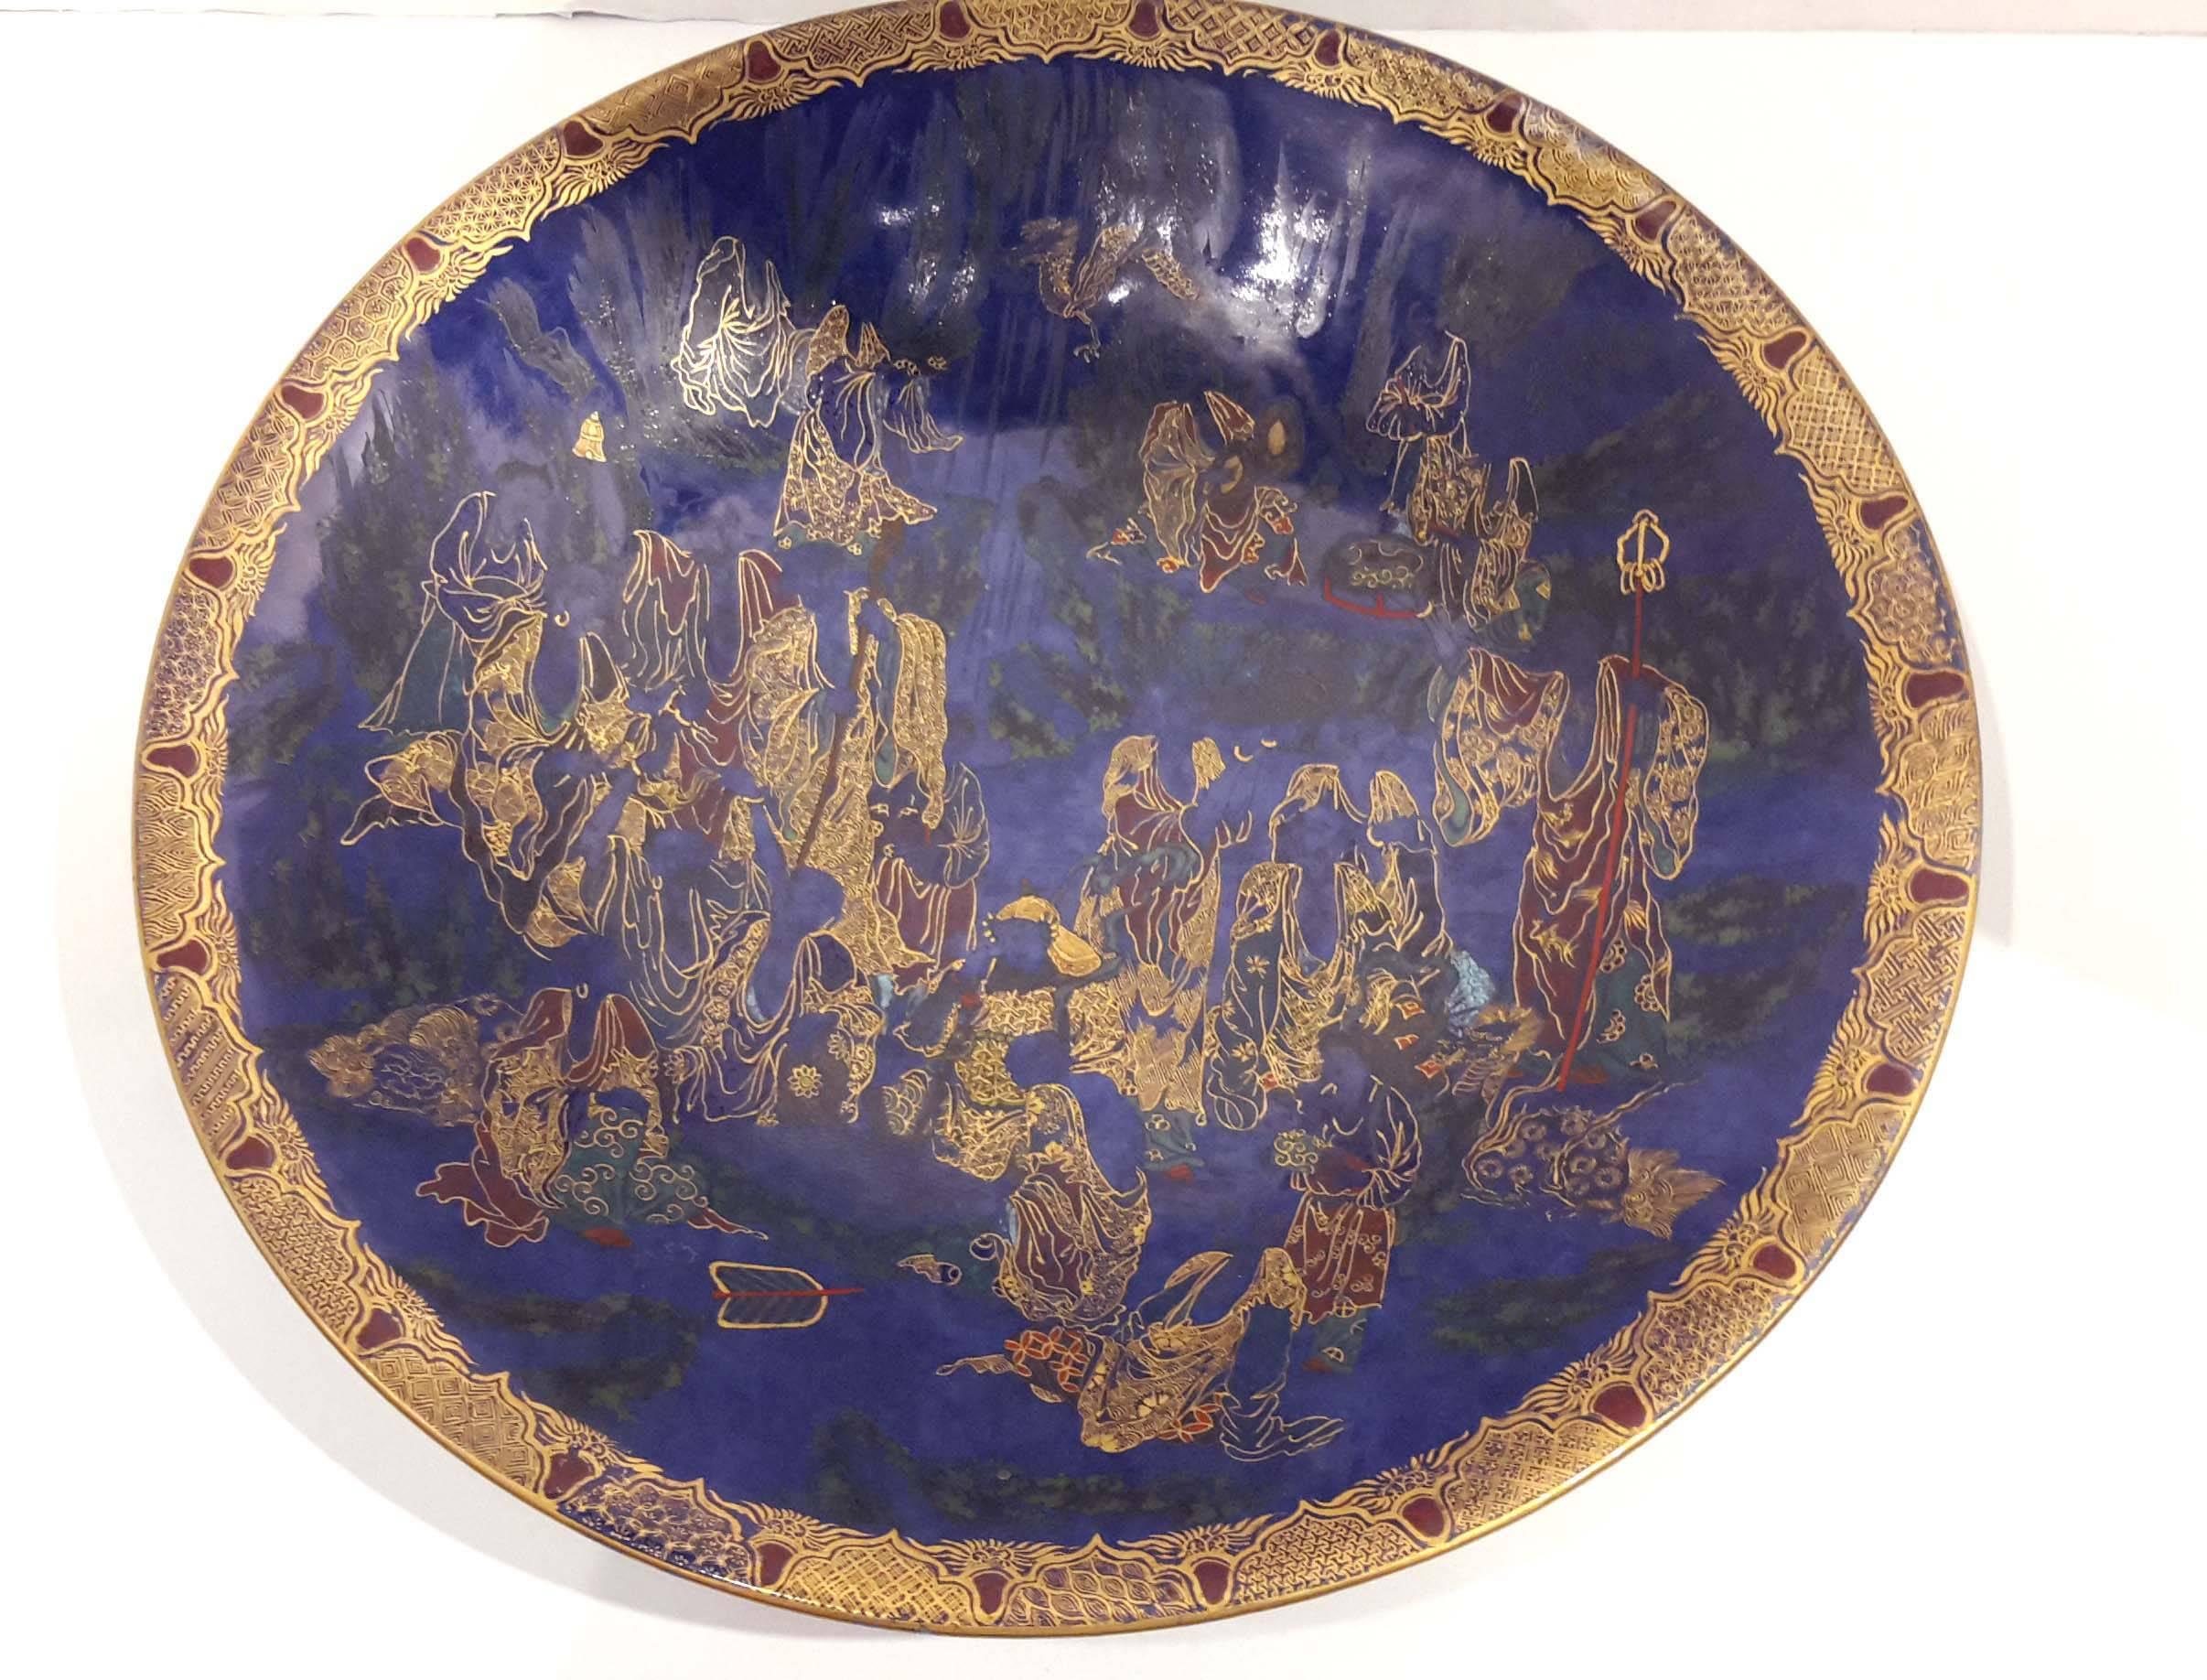 Great quality painting of deities with gold, silver and enamel decorations.
Underglazed blue six character DAOGUANG mark.
This is an early 20th century Chinese plate that might have been decorated by Japanese.
 